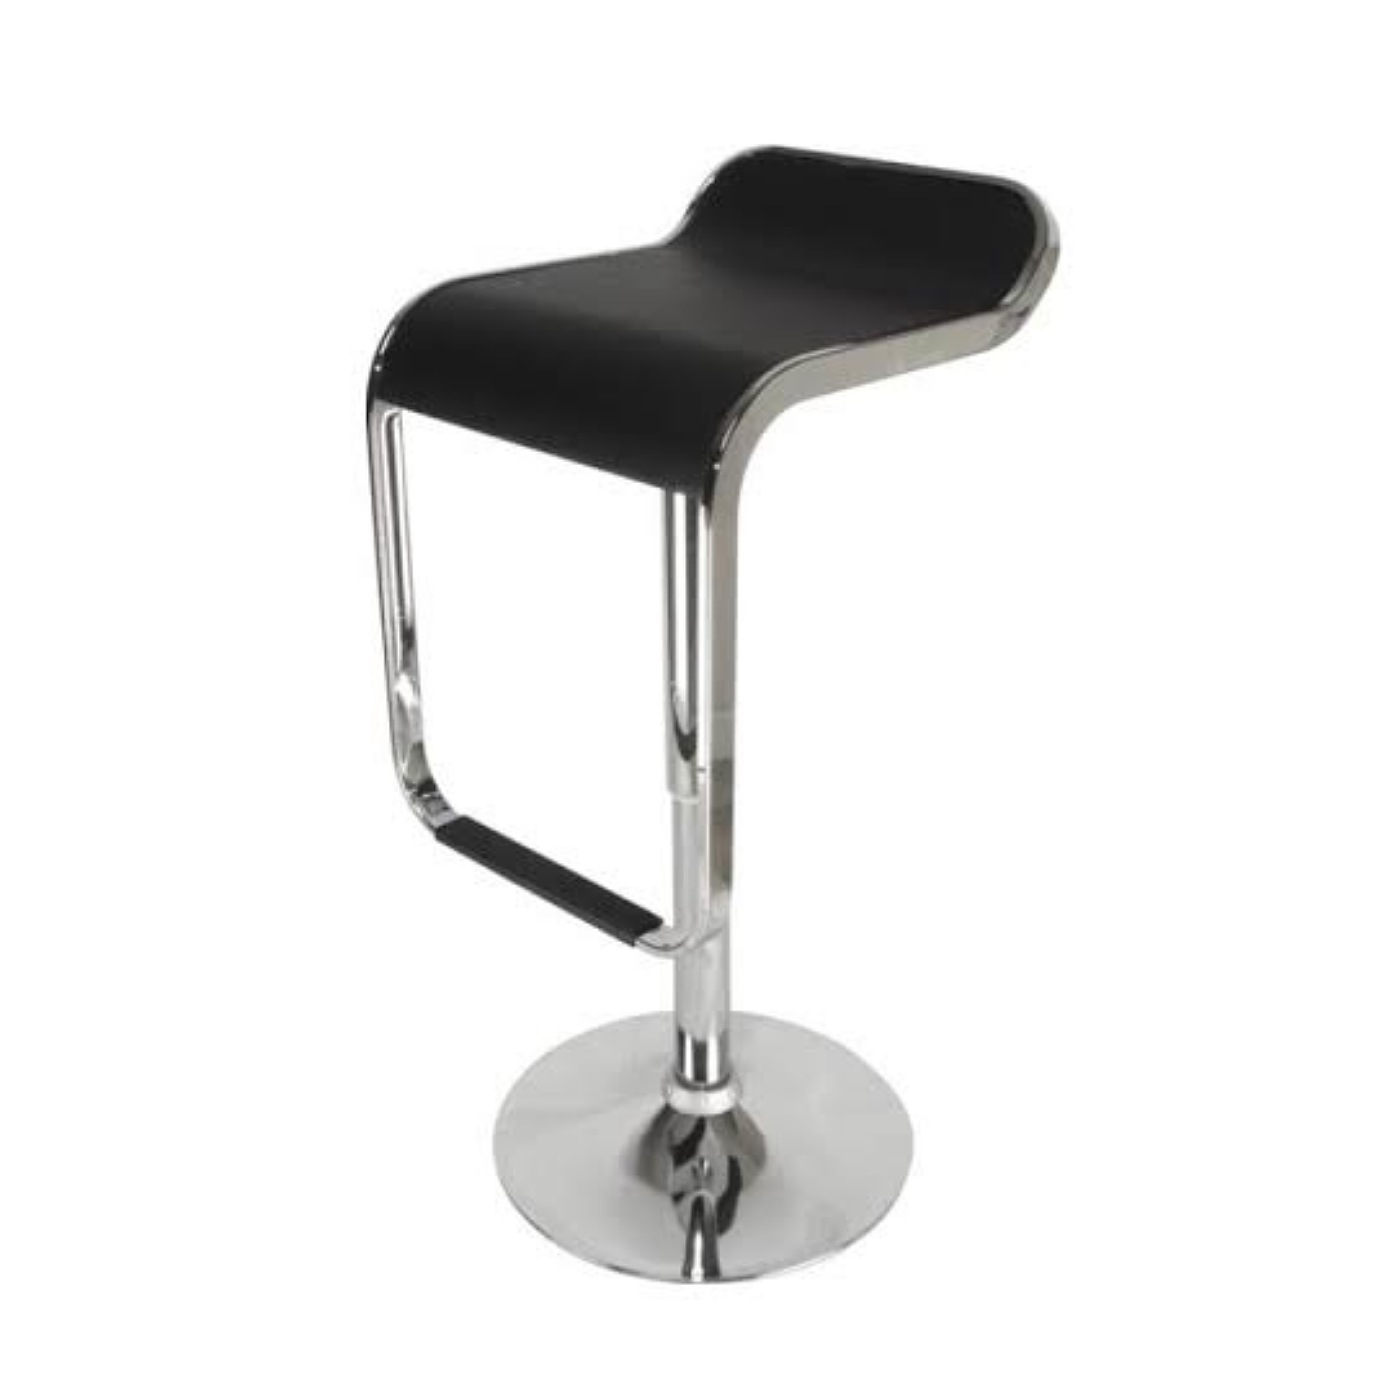 Steel Bar Stool With Black Seating And Steel Footrest.